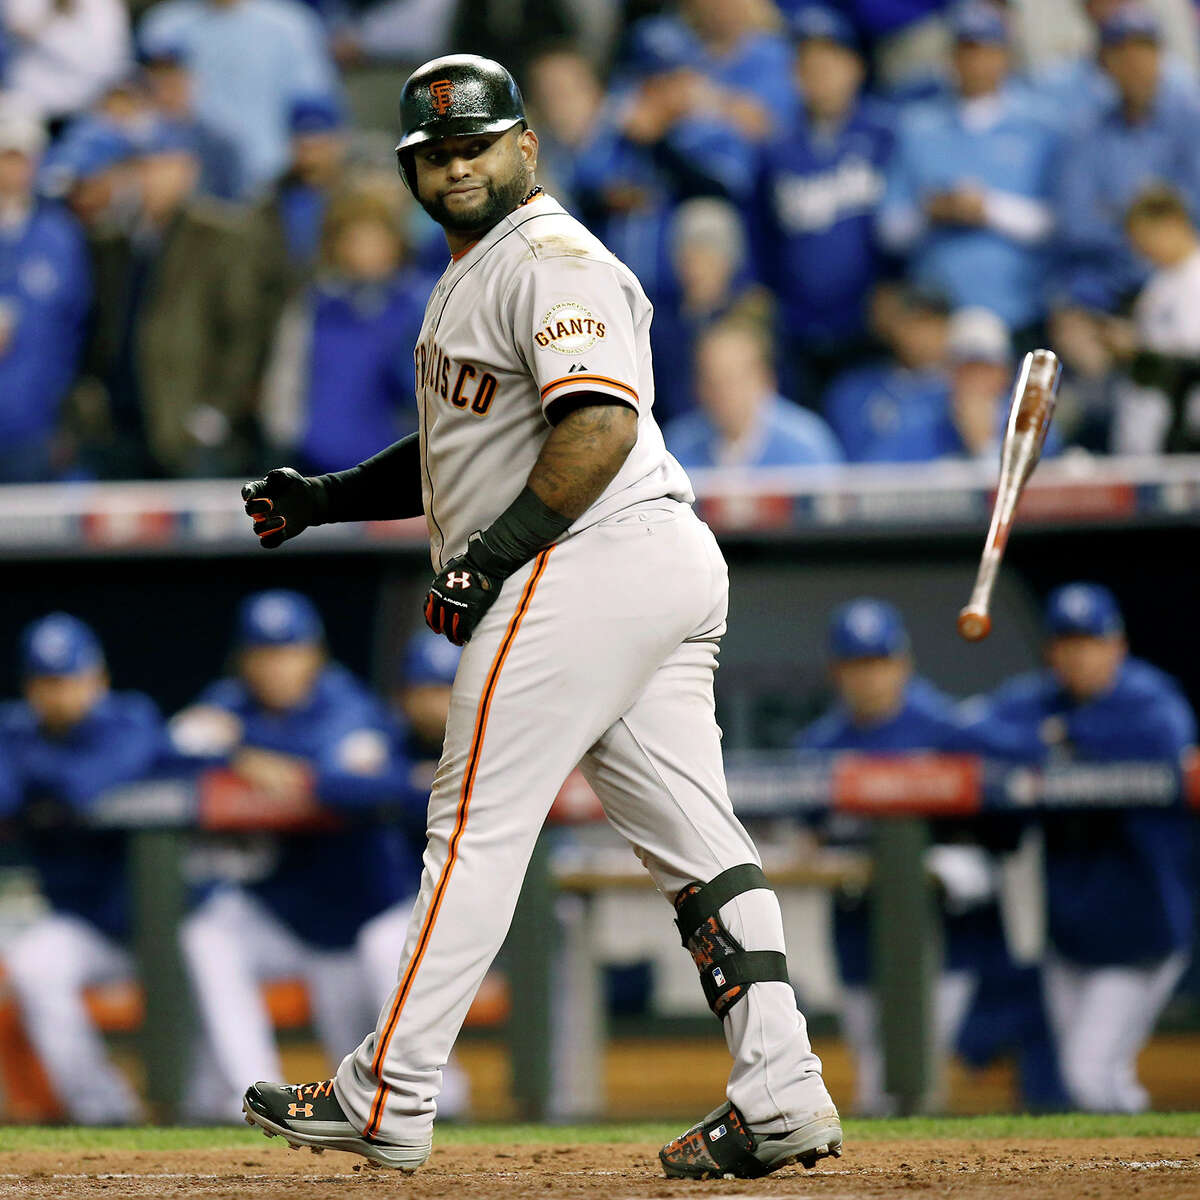 Pablo Sandoval draws a walk in the sixth inning during Game 6 of the World Series at Kauffman Stadium on Tuesday, Oct. 28, 2014 in Kansas City, Mo.